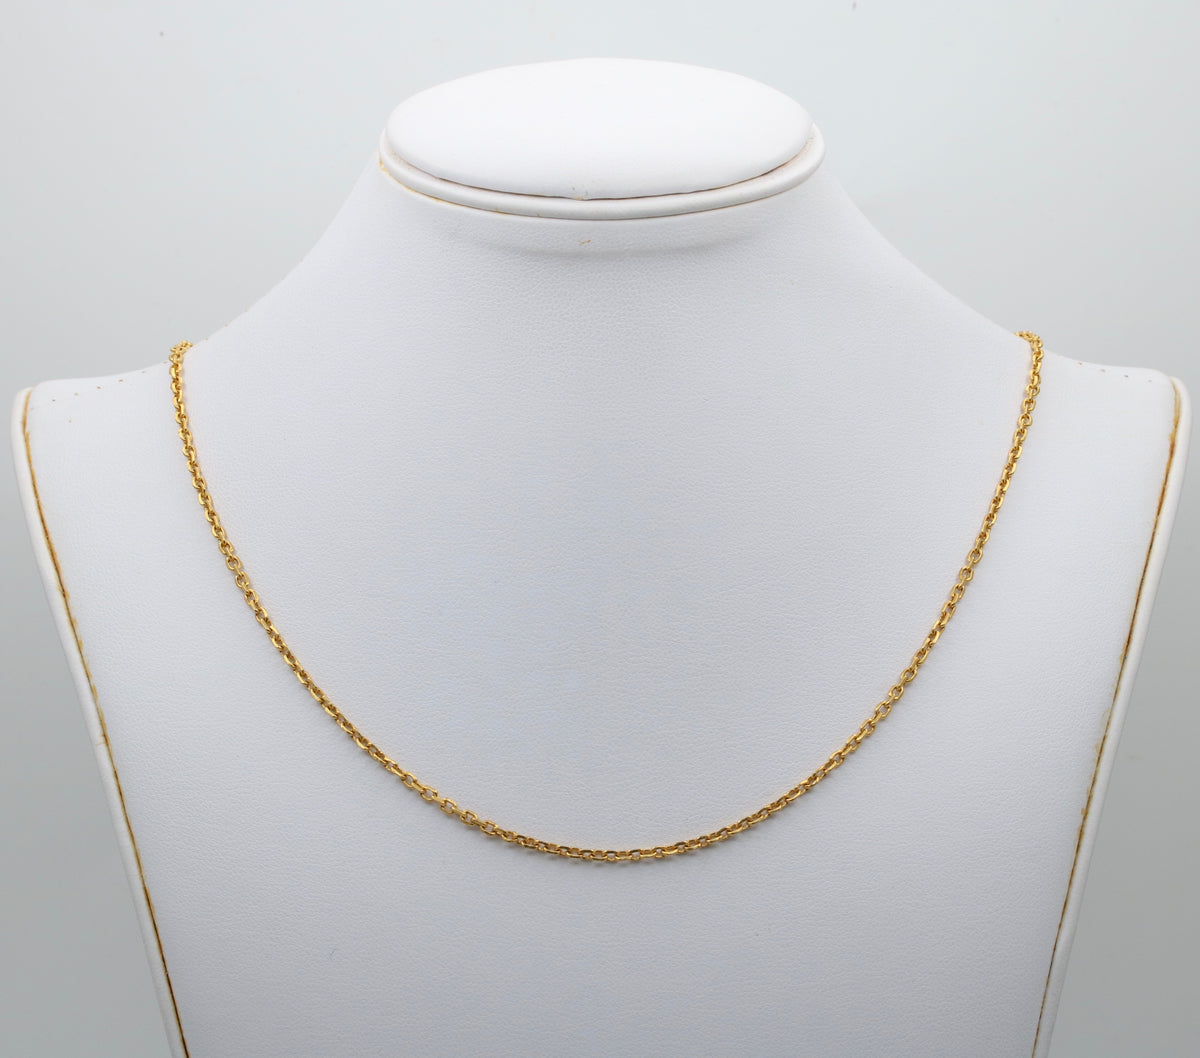 22K Gold Cable Link Chain, 23.5” Long